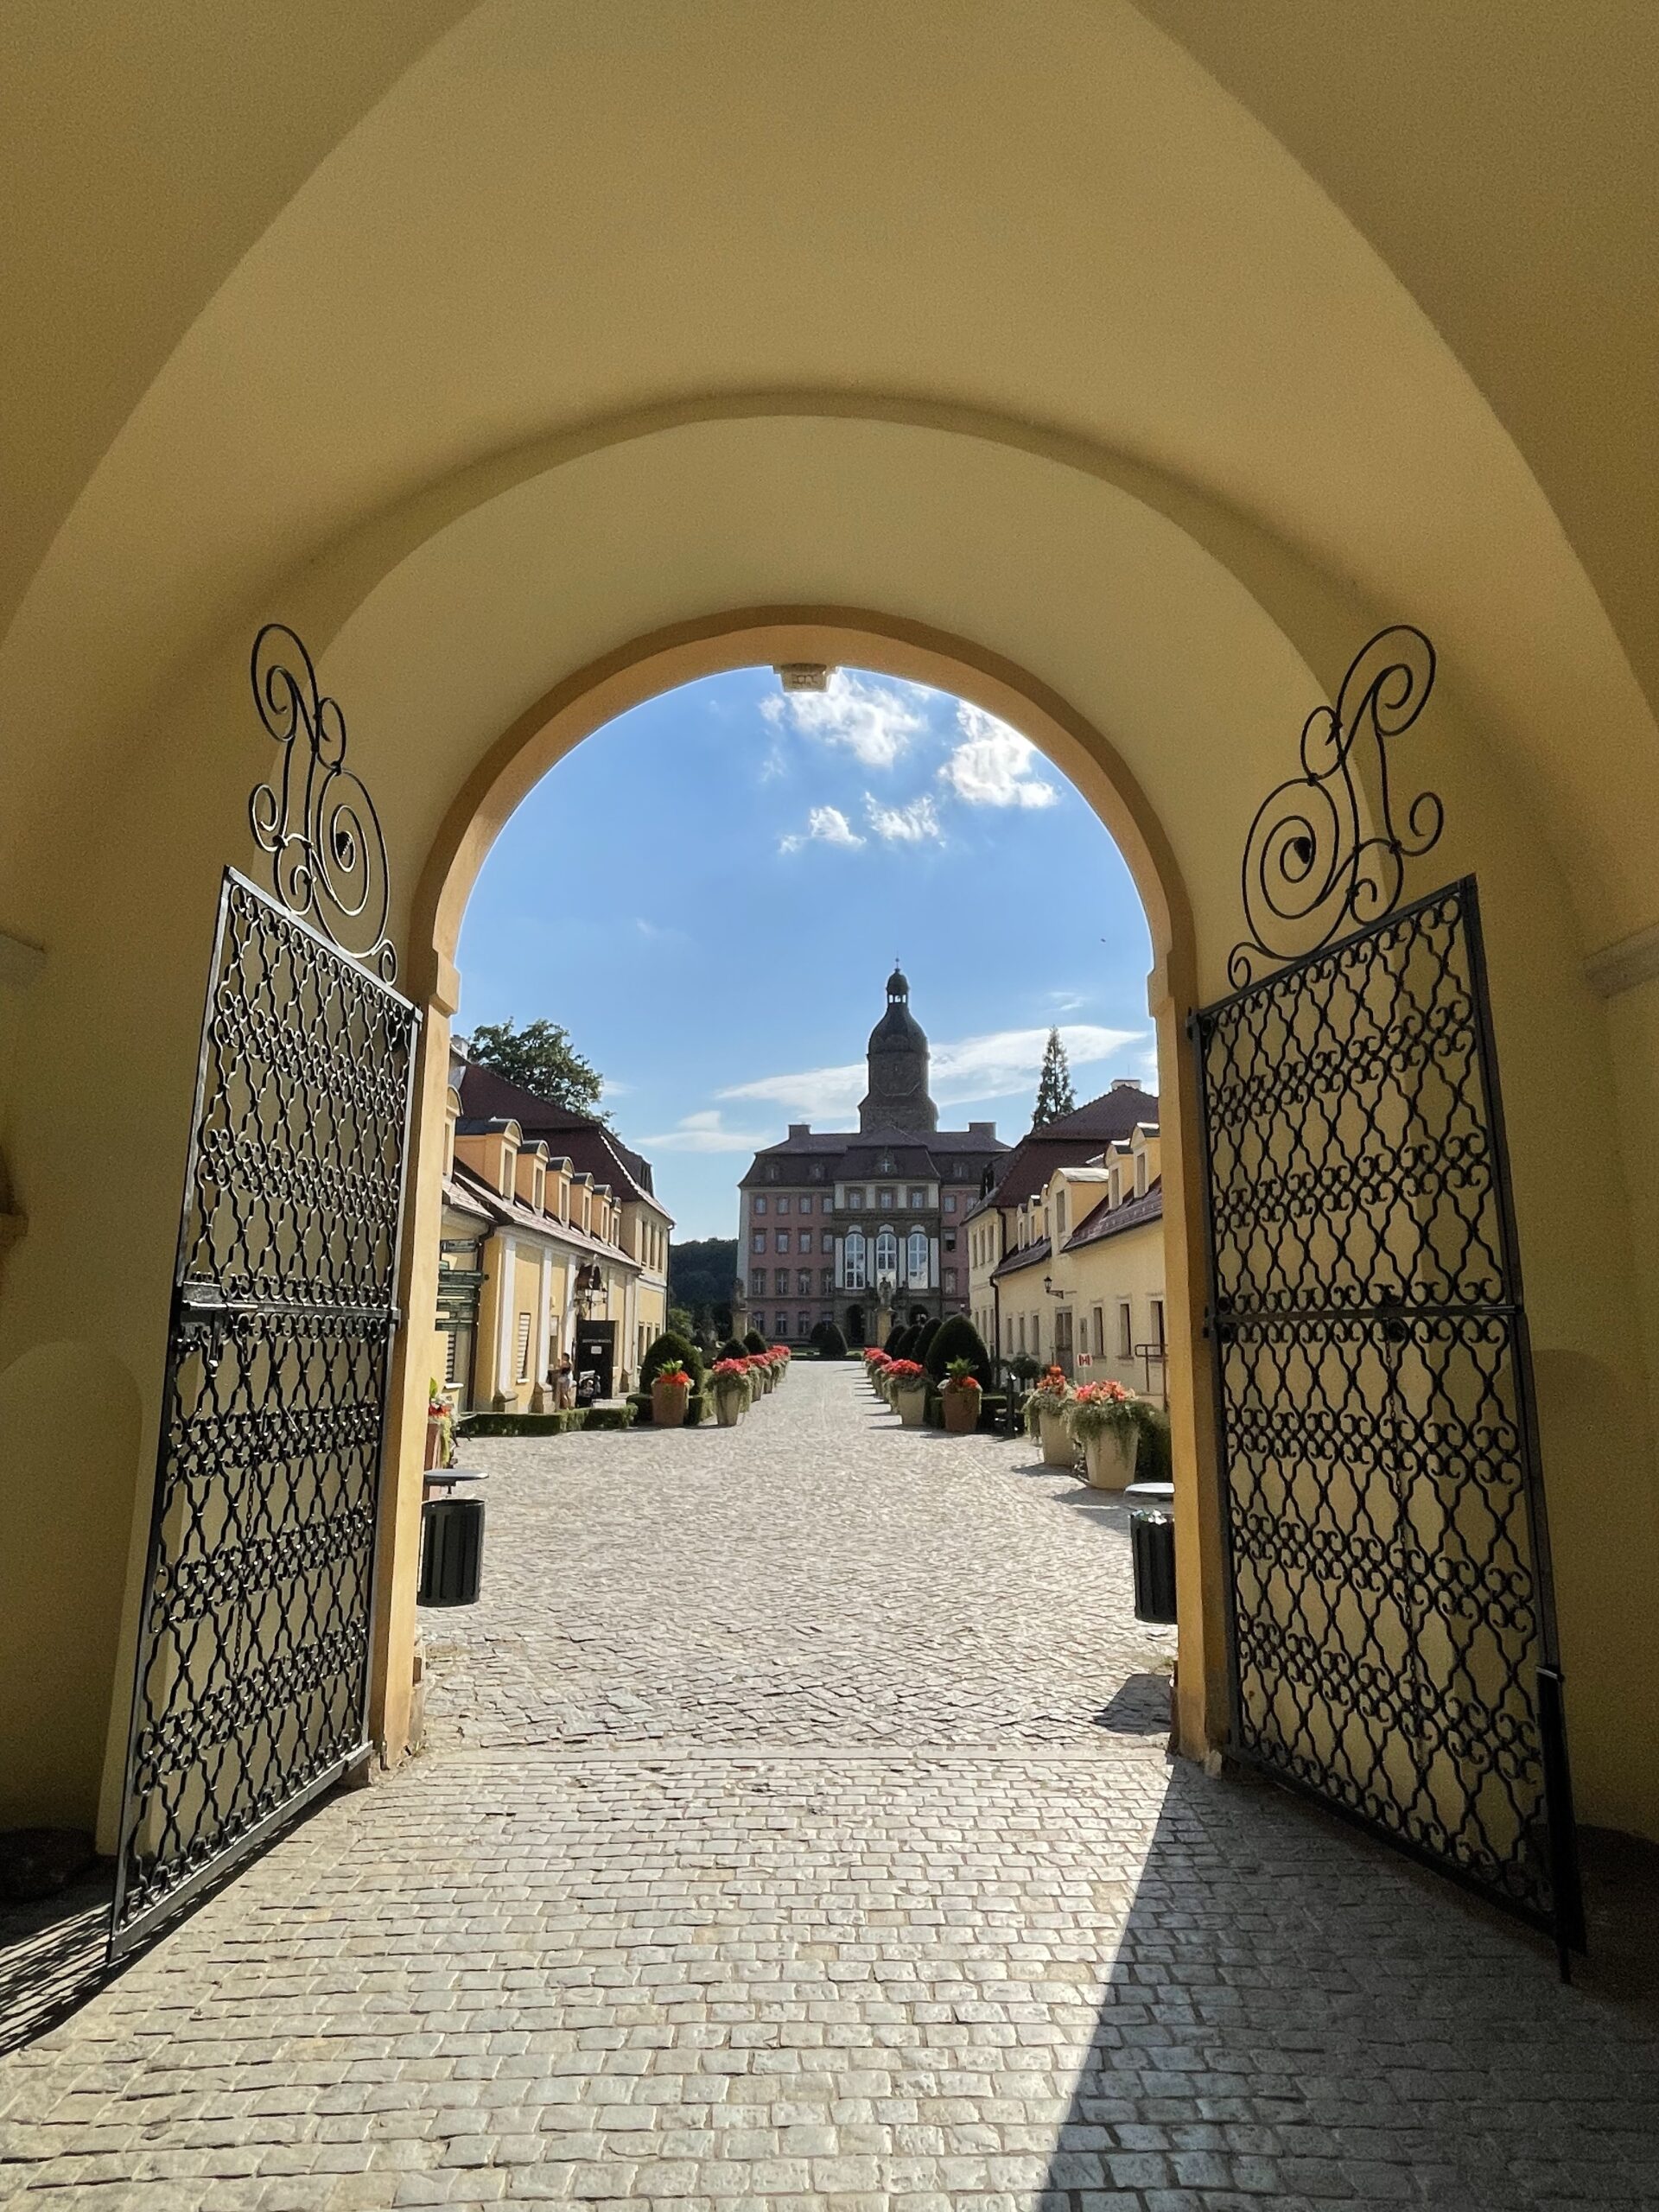 One day visit to Książ Castle – one of the most impressive palaces in Poland.